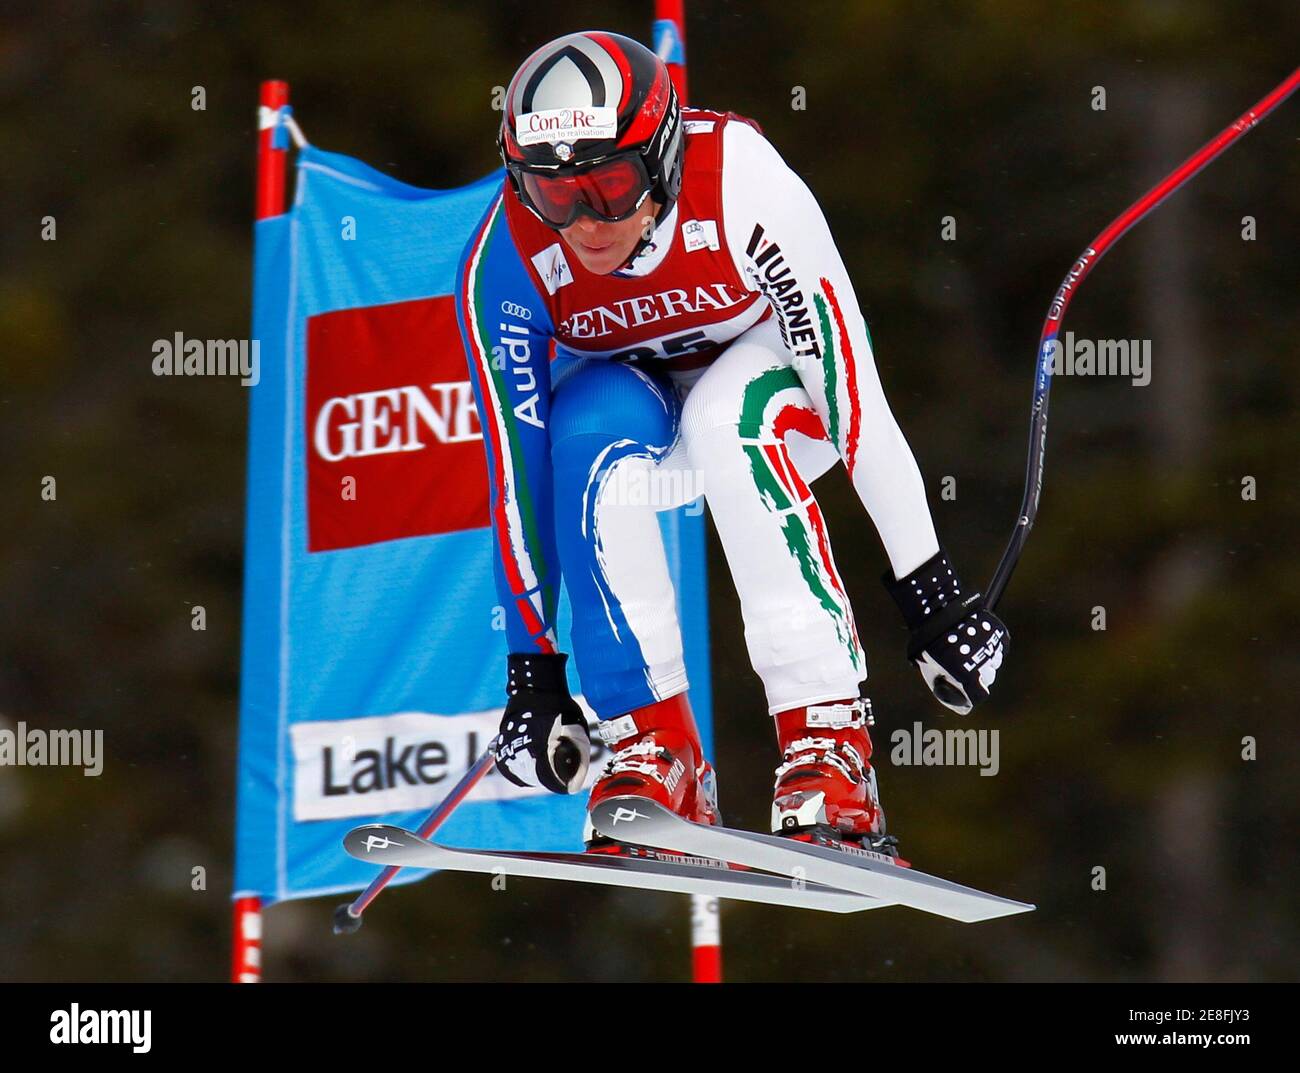 Lucia Recchia of Italy speeds past a gate during the women's World Cup downhill alpine skiing race in Lake Louise, Alberta December 5, 2009. REUTERS/Mike Blake (CANADA SPORT SKIING) Stock Photo